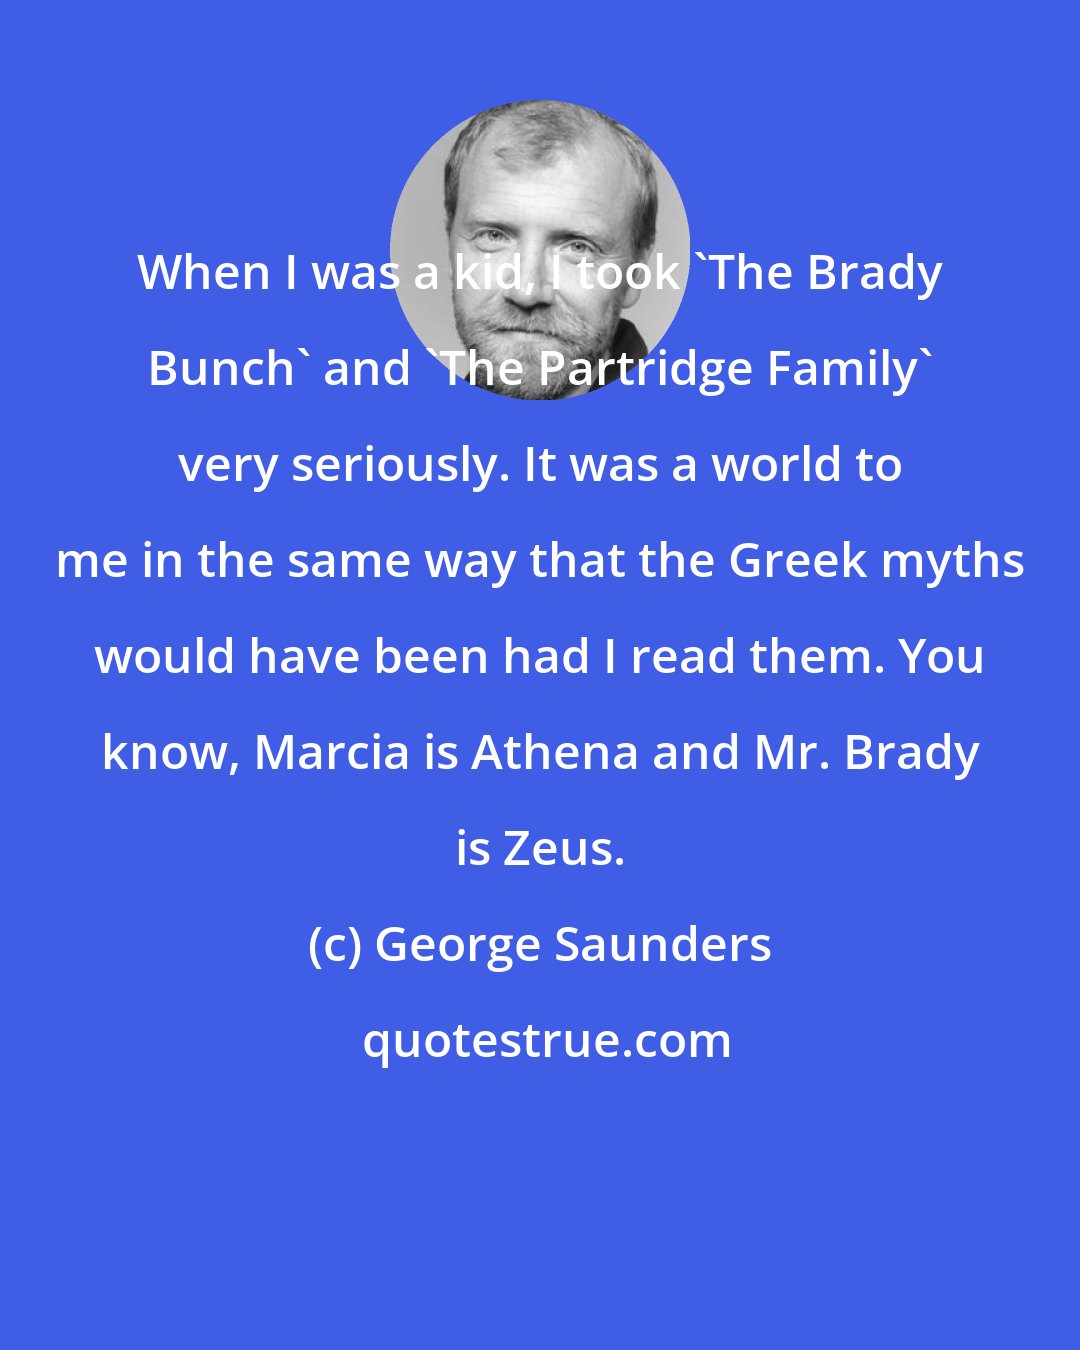 George Saunders: When I was a kid, I took 'The Brady Bunch' and 'The Partridge Family' very seriously. It was a world to me in the same way that the Greek myths would have been had I read them. You know, Marcia is Athena and Mr. Brady is Zeus.